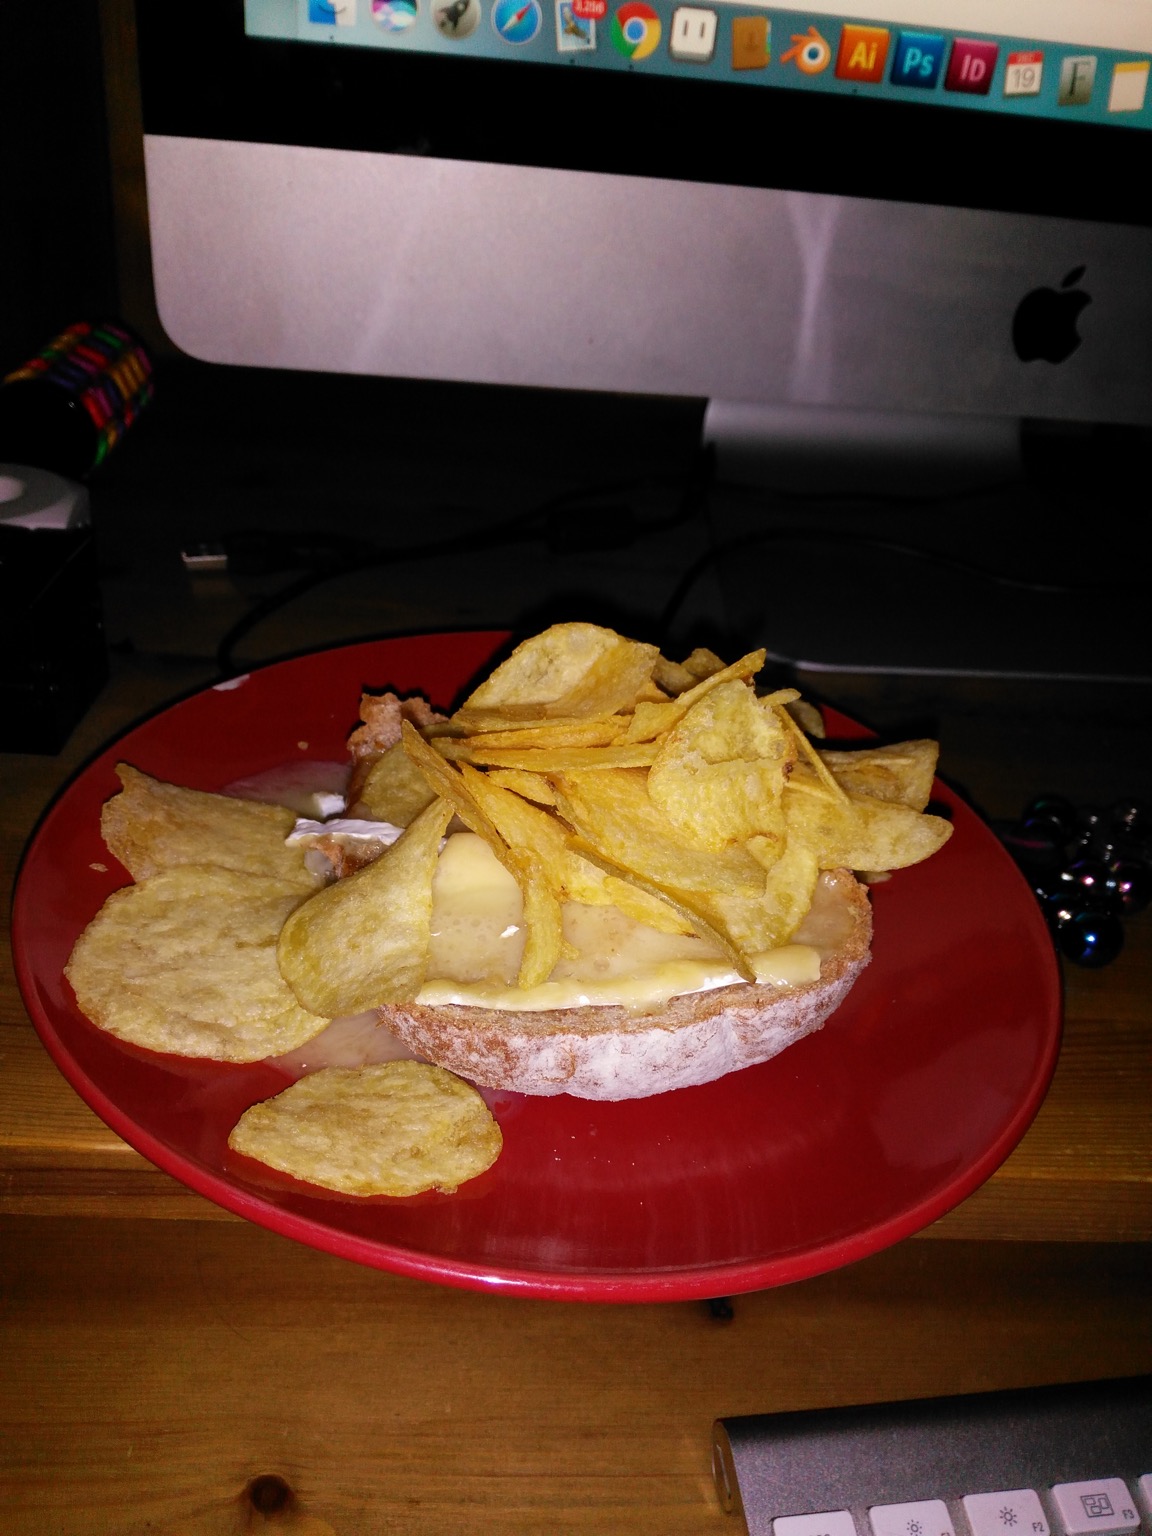 Flash photo of crisps and brie on sliced white bread